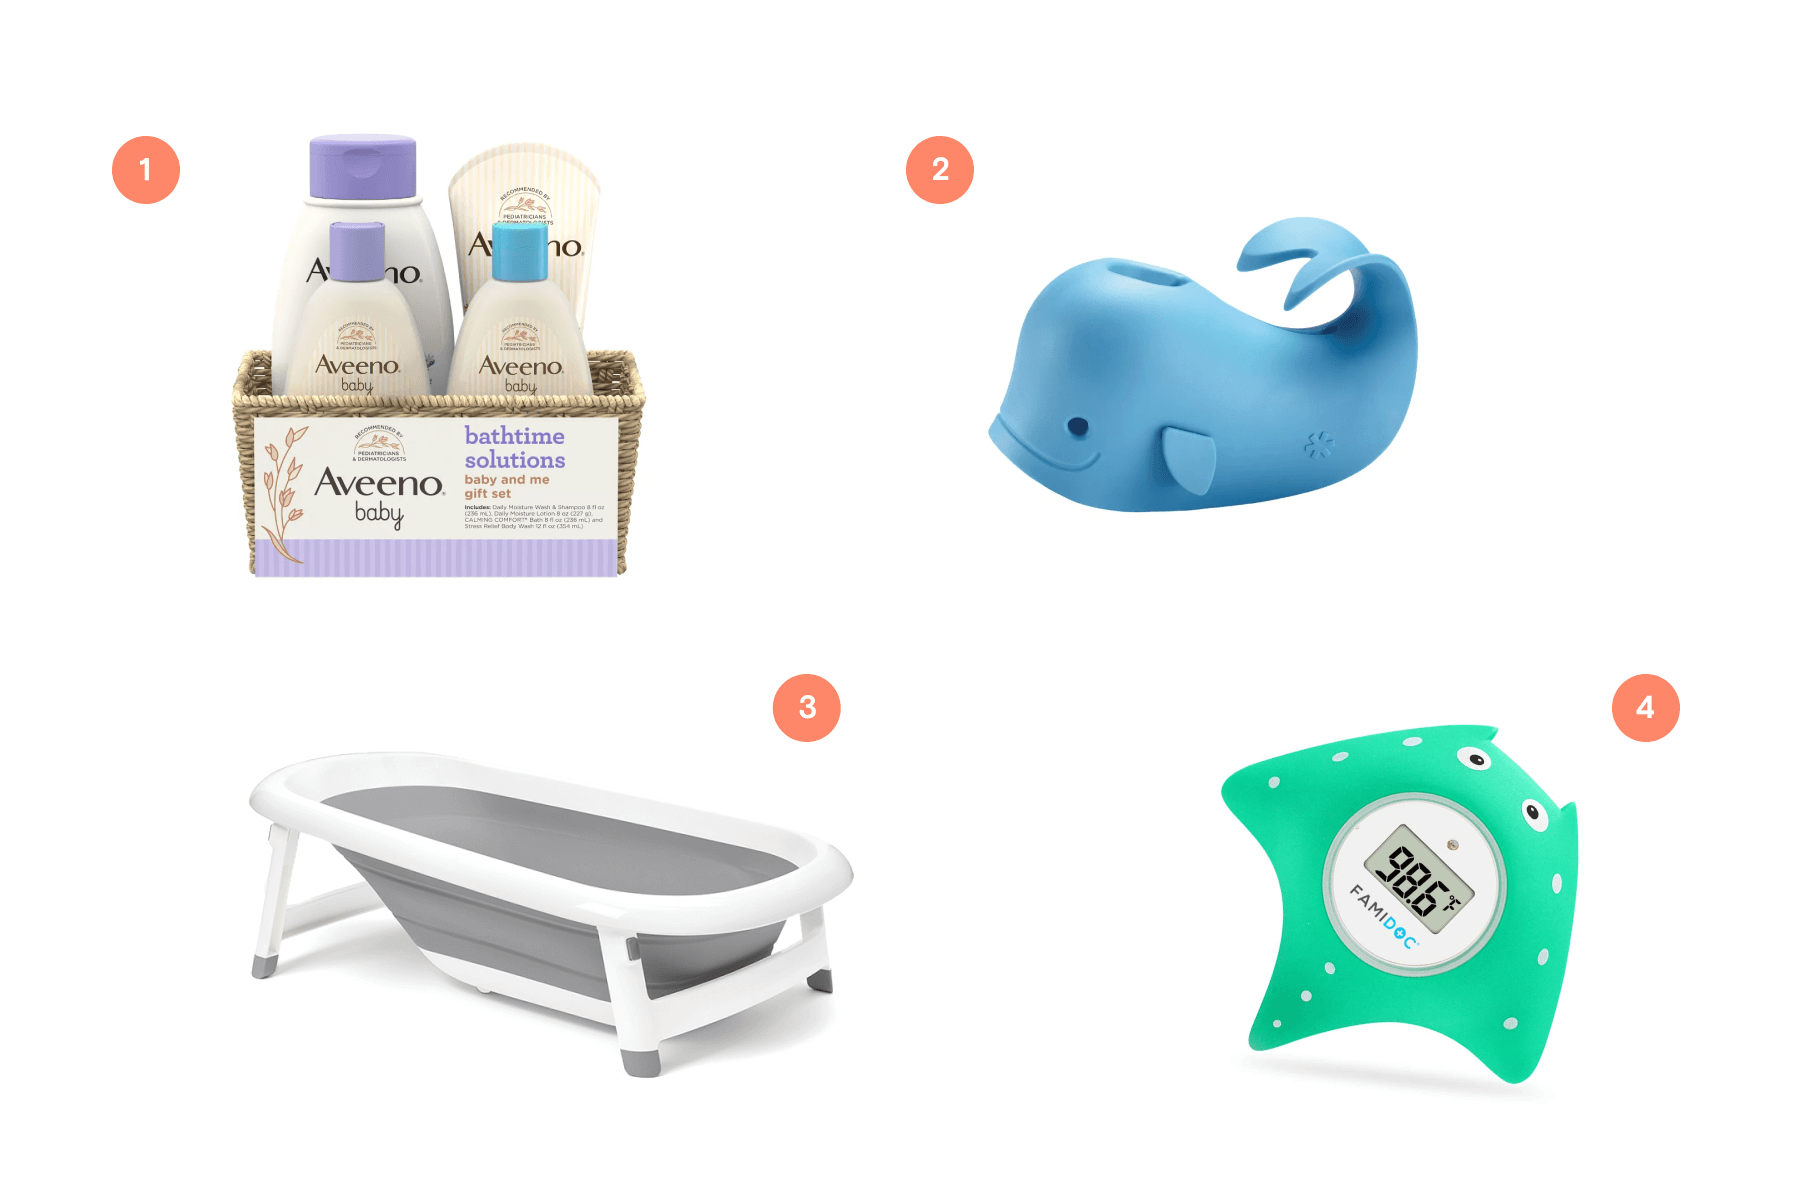 Four numbered baby items: A basket of four Aveeno bath products, a whale-shaped tub spout cover, a baby tub, and a green thermometer shaped like a manta ray.